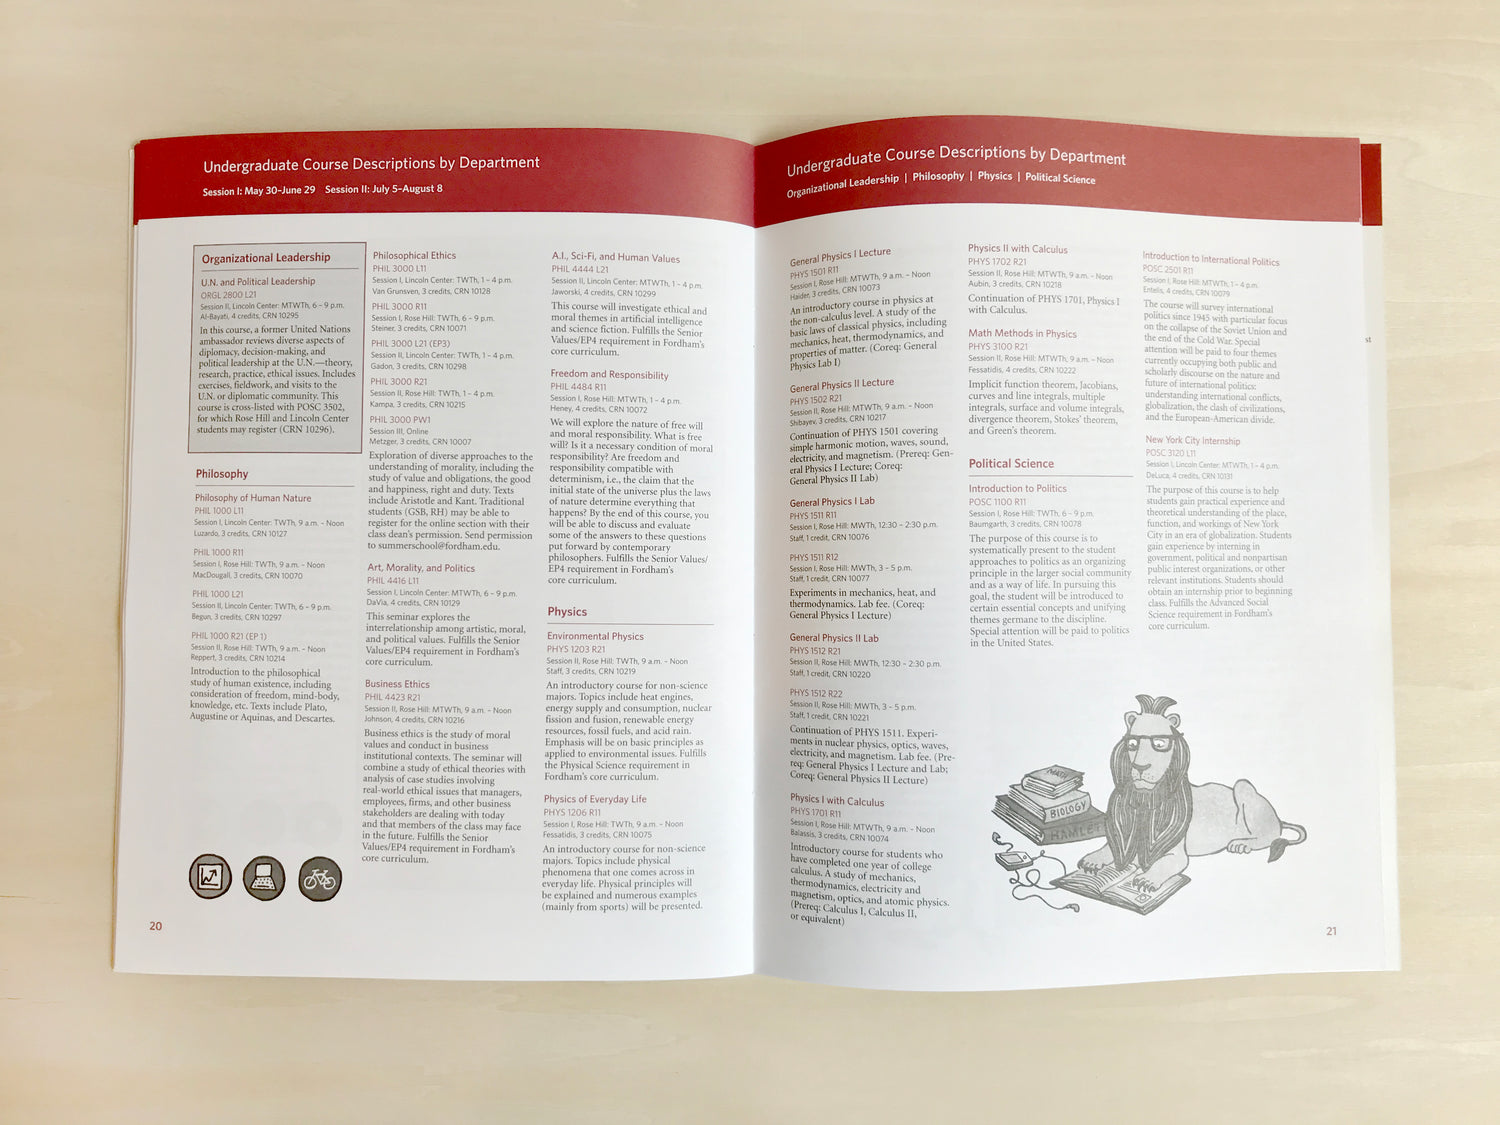 flatlay of Fordham University's summer program catalog spread showing course offerings and feature illustrated icons on left page bottom corner, and NY Public Library lion statue reading in the right page bottom corner